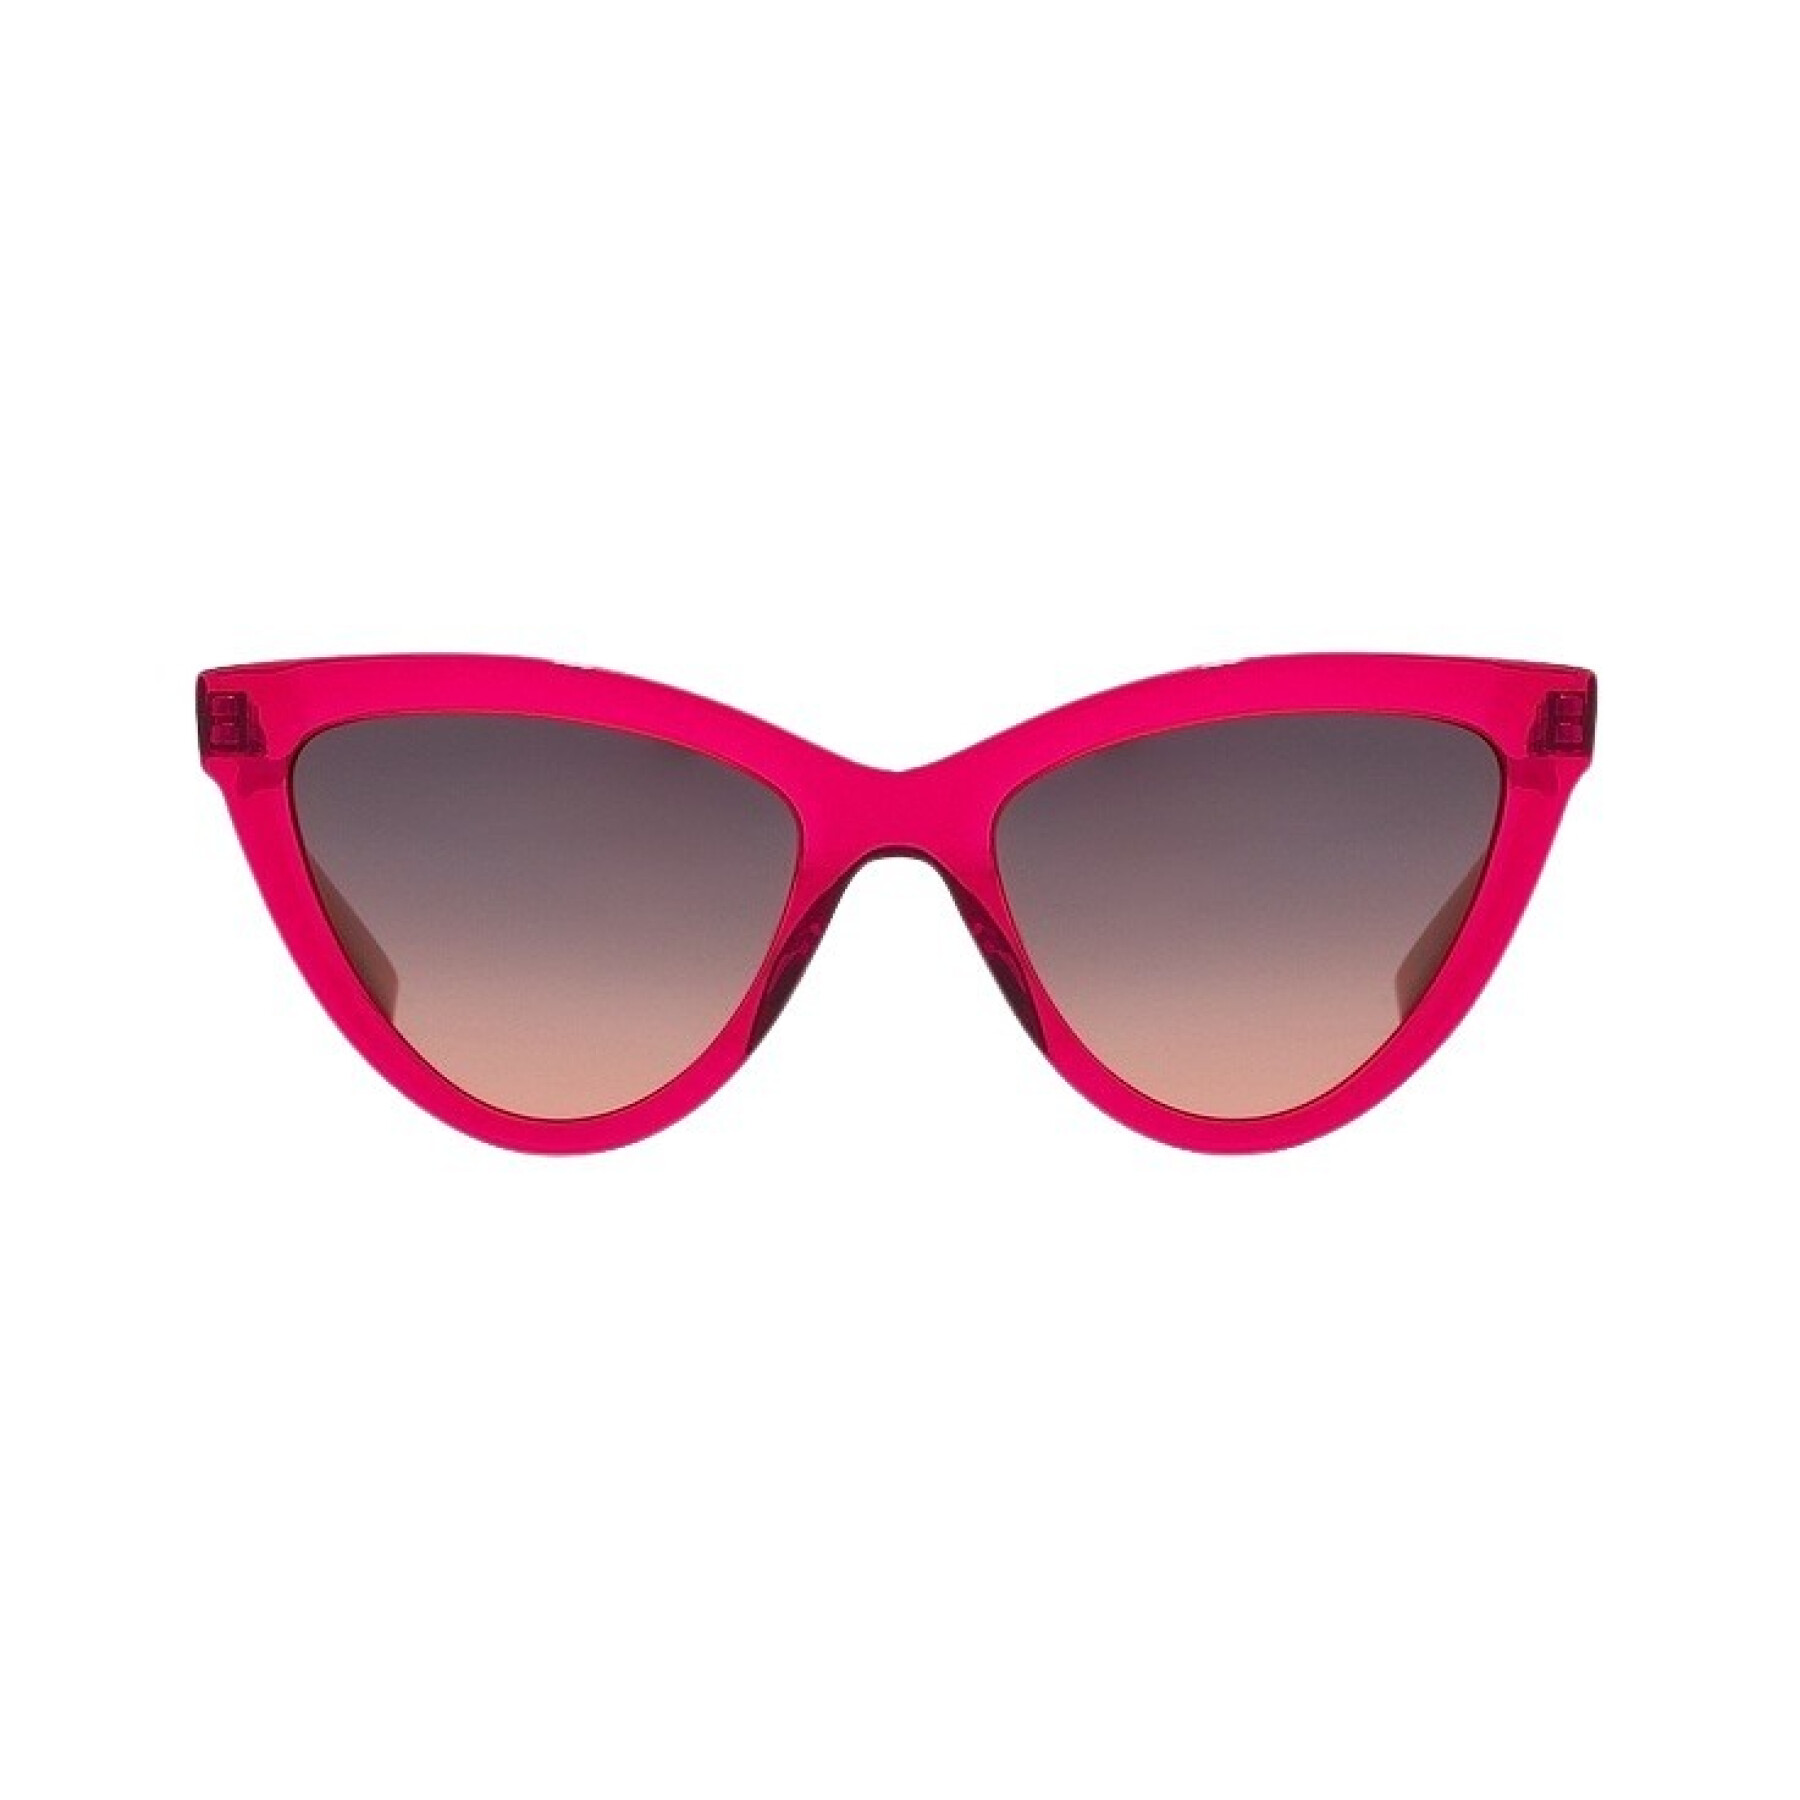 Lunettes de soleil Hawkers Cosmo